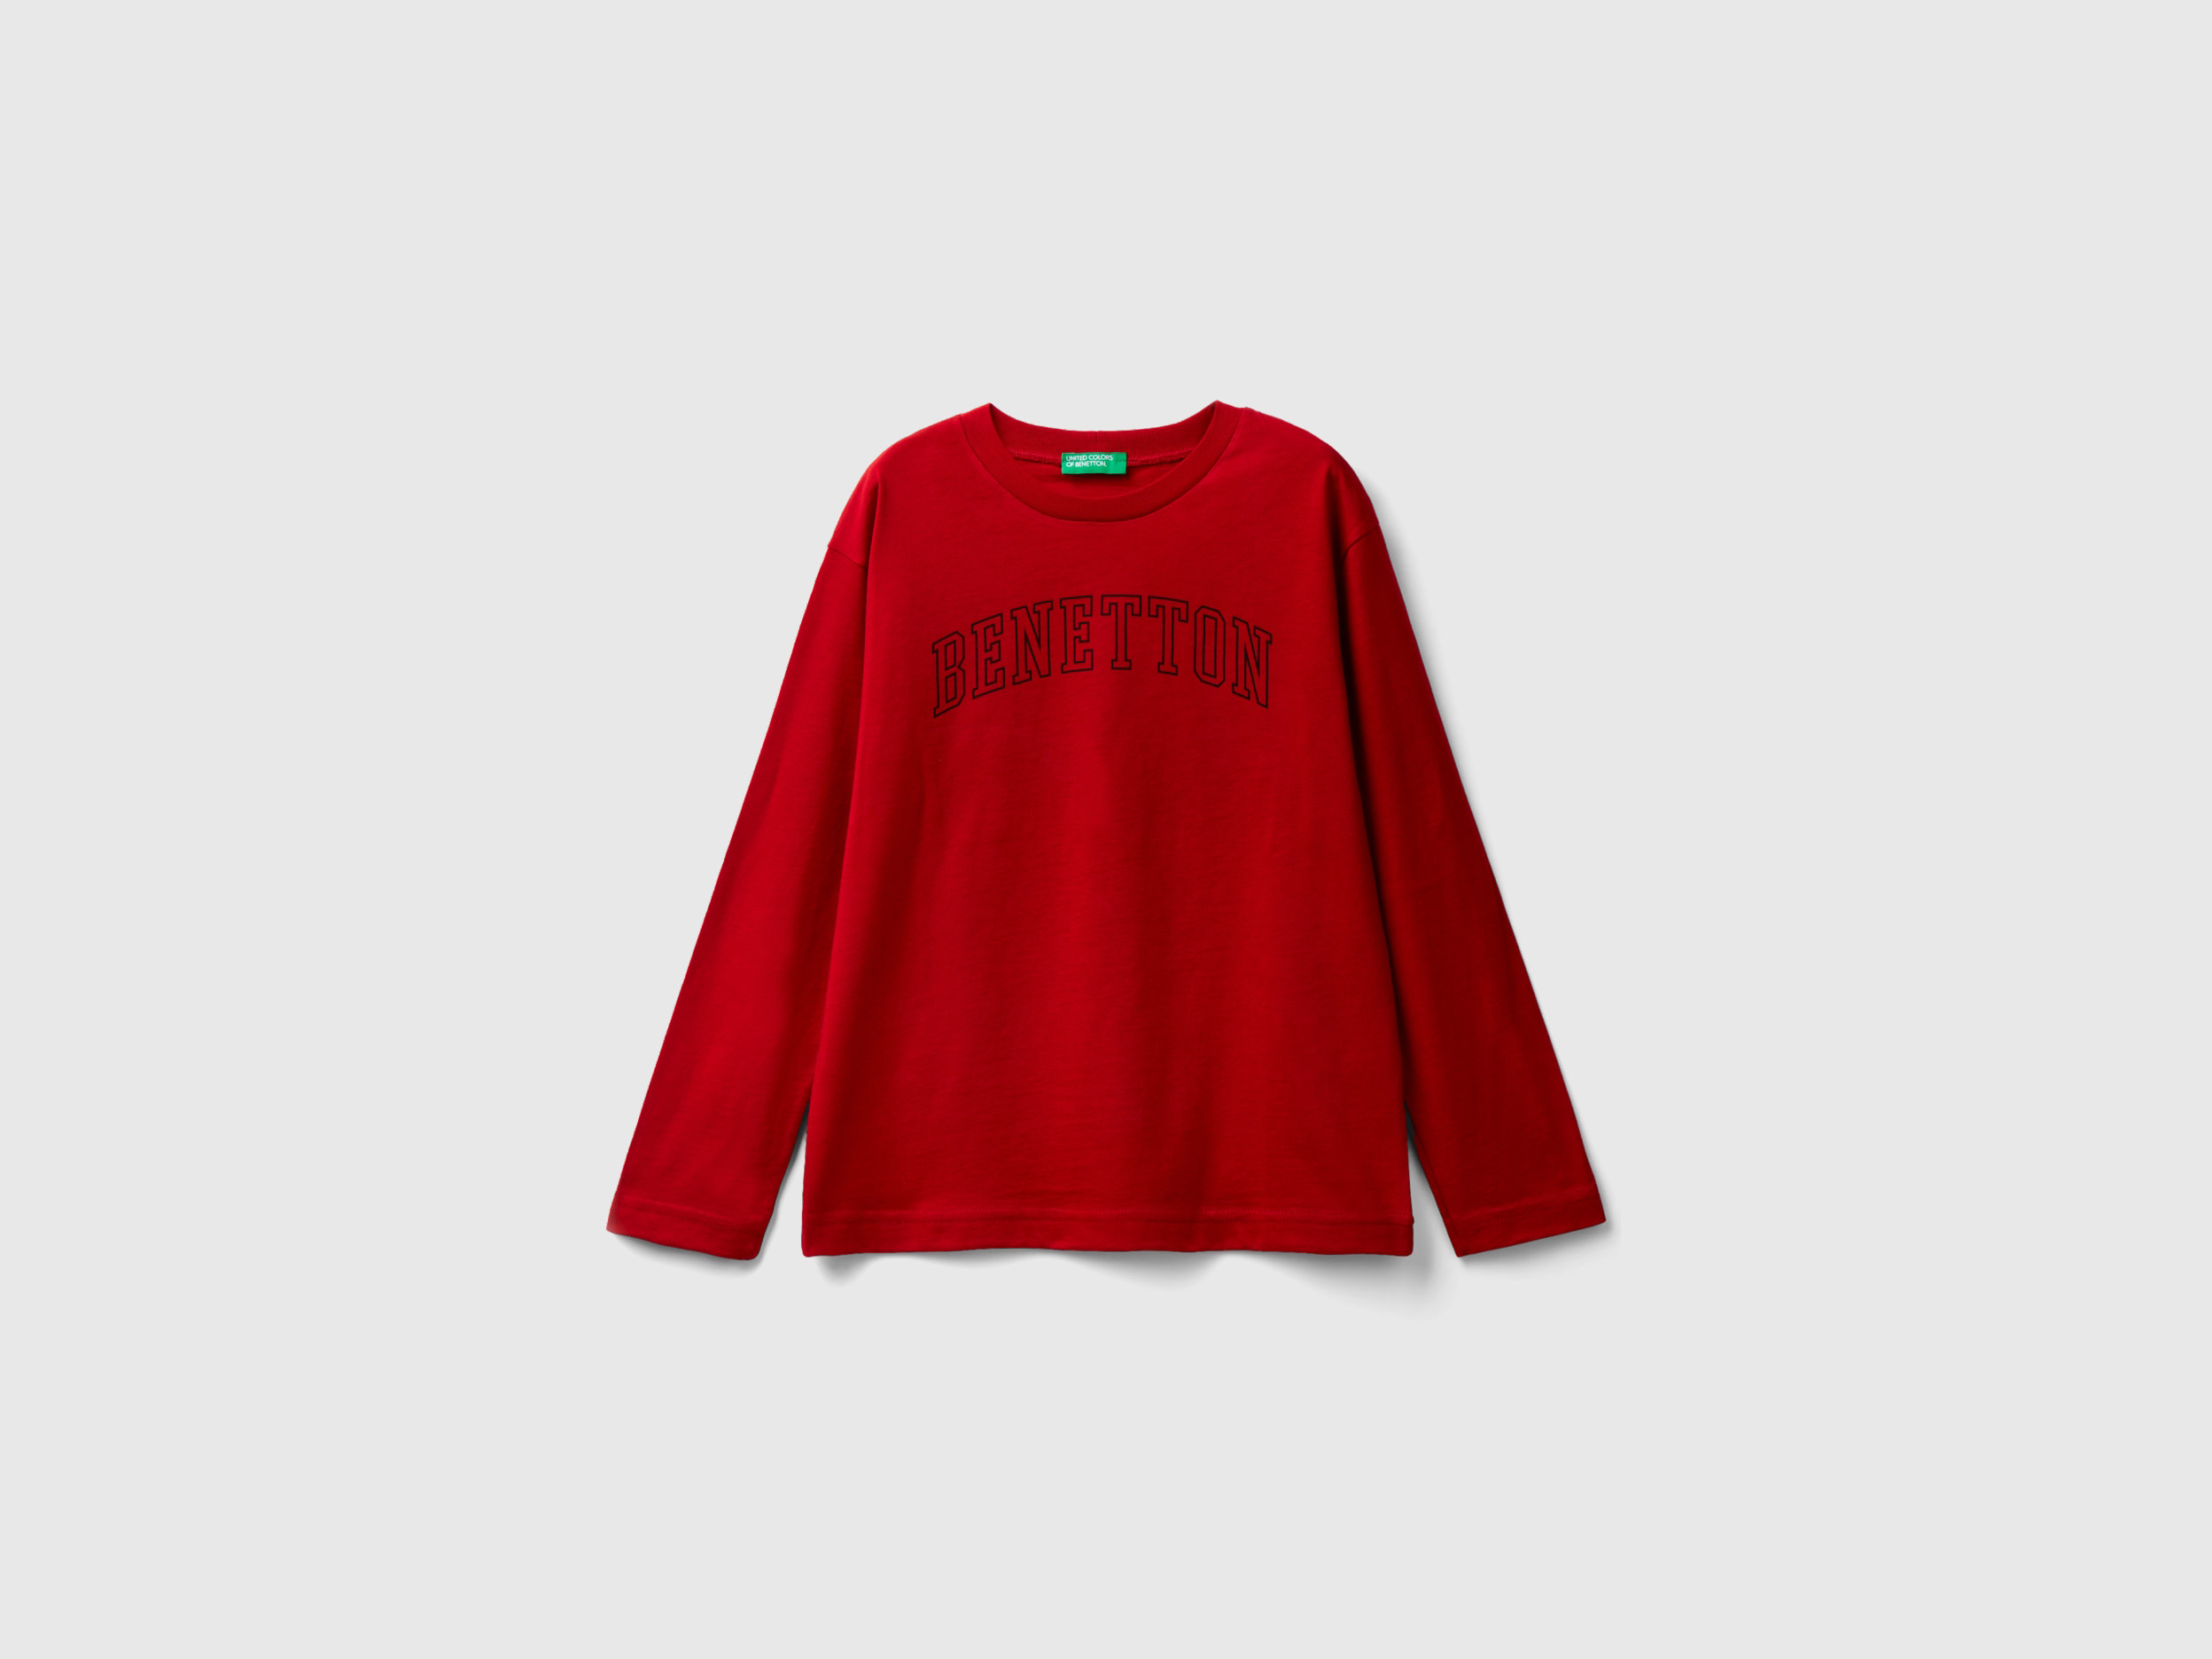 Benetton, Long Sleeve T-shirt With Logo, size 2XL, Red, Kids